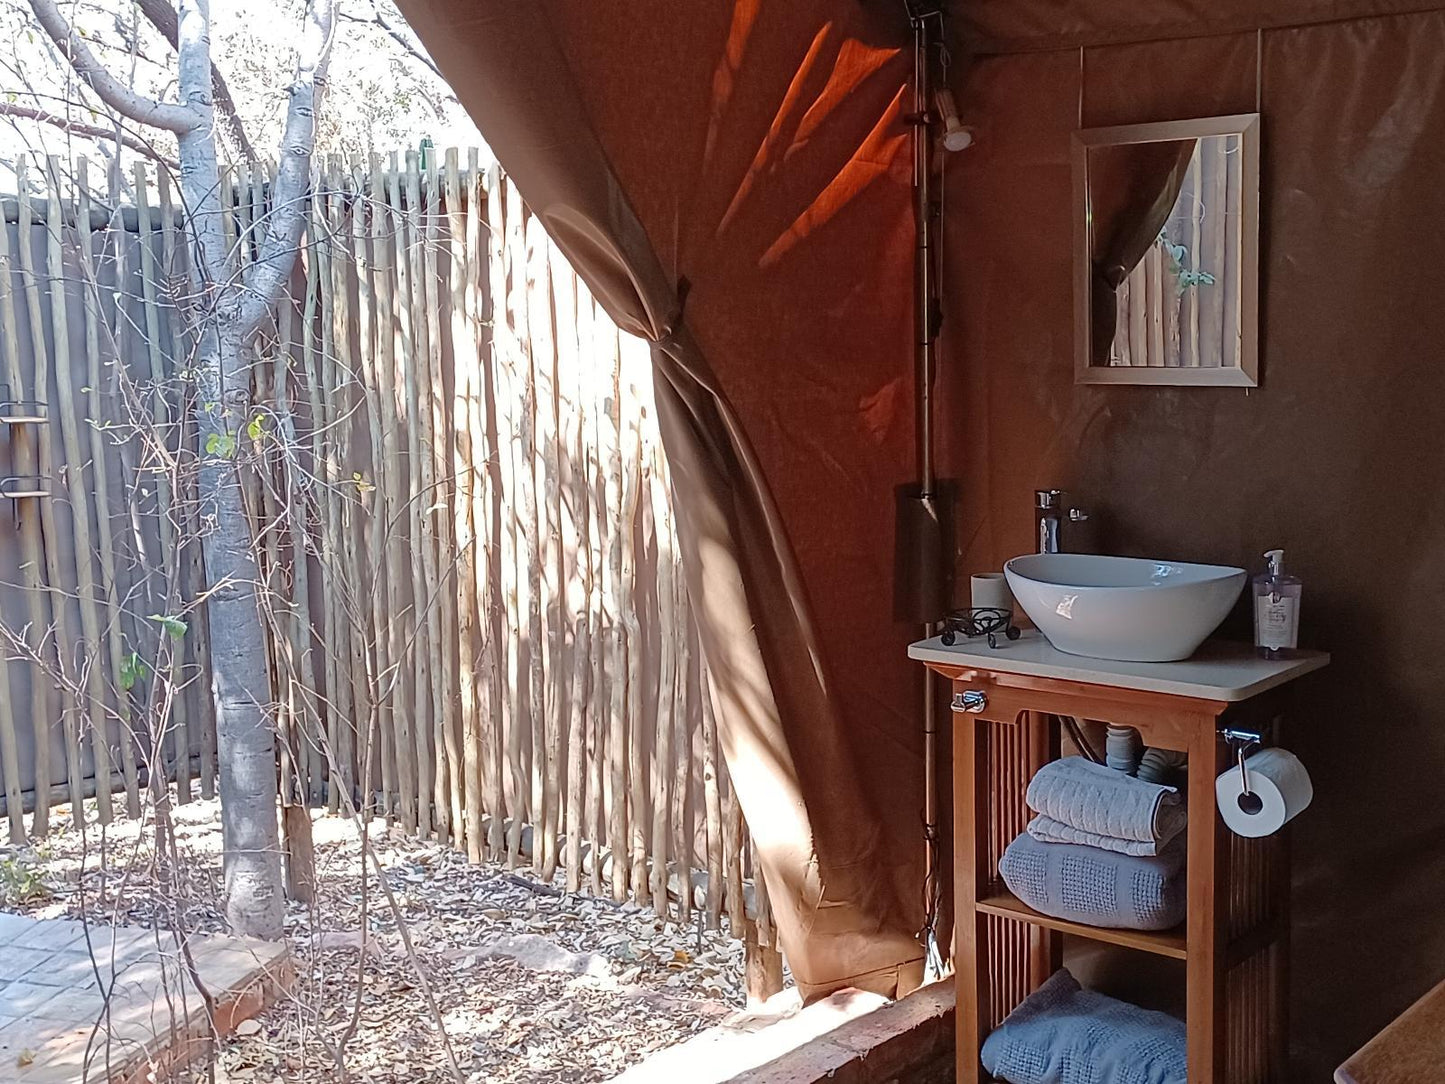 Bushwillow @ Duikerskloof Exclusive Tented Camp